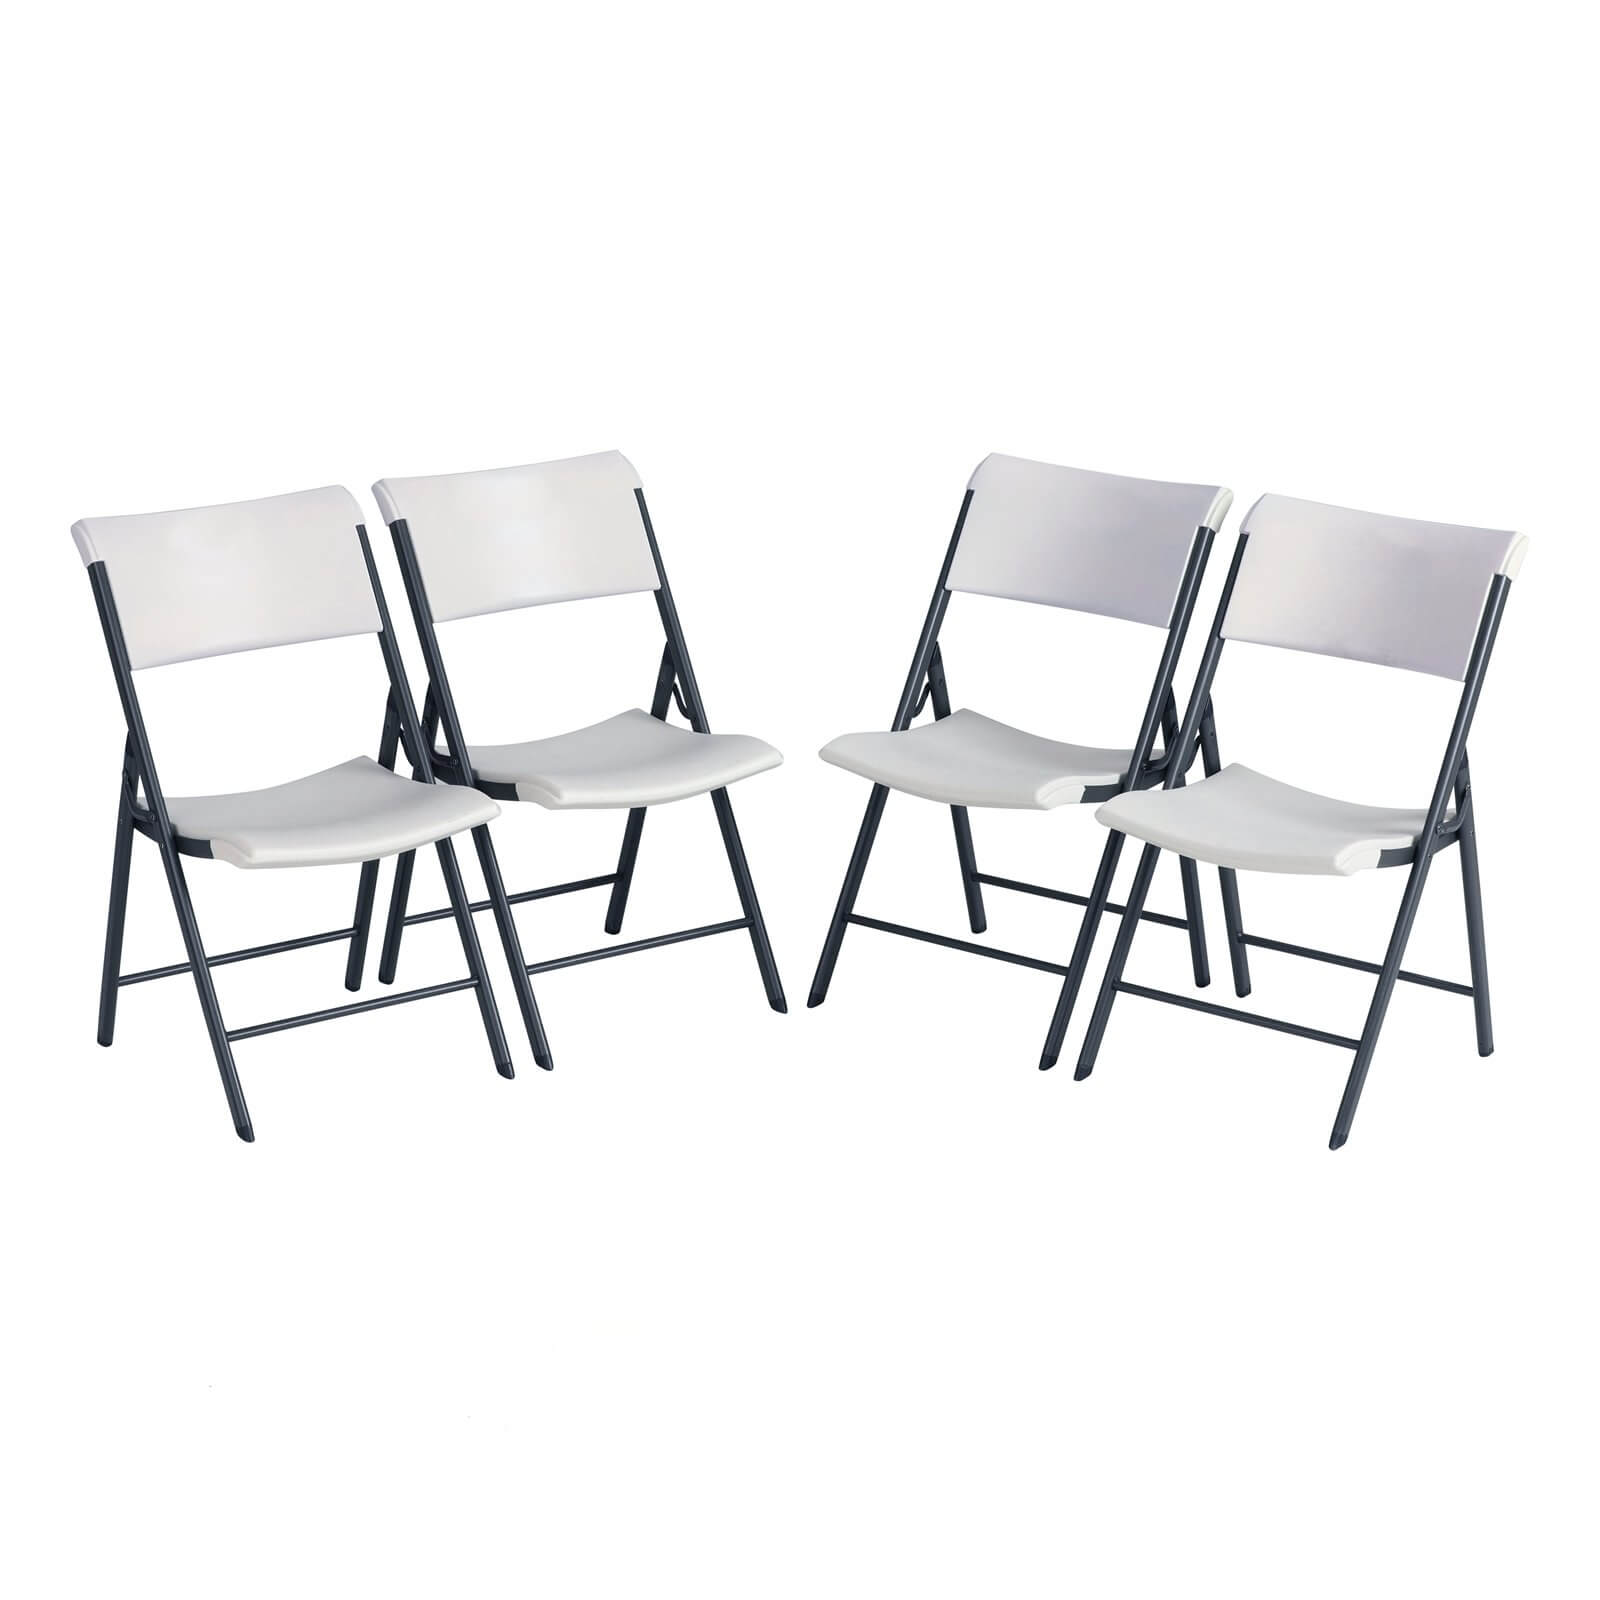 Photo of Lifetime Ultimate Comfort Folding Chair -pack Of 4-